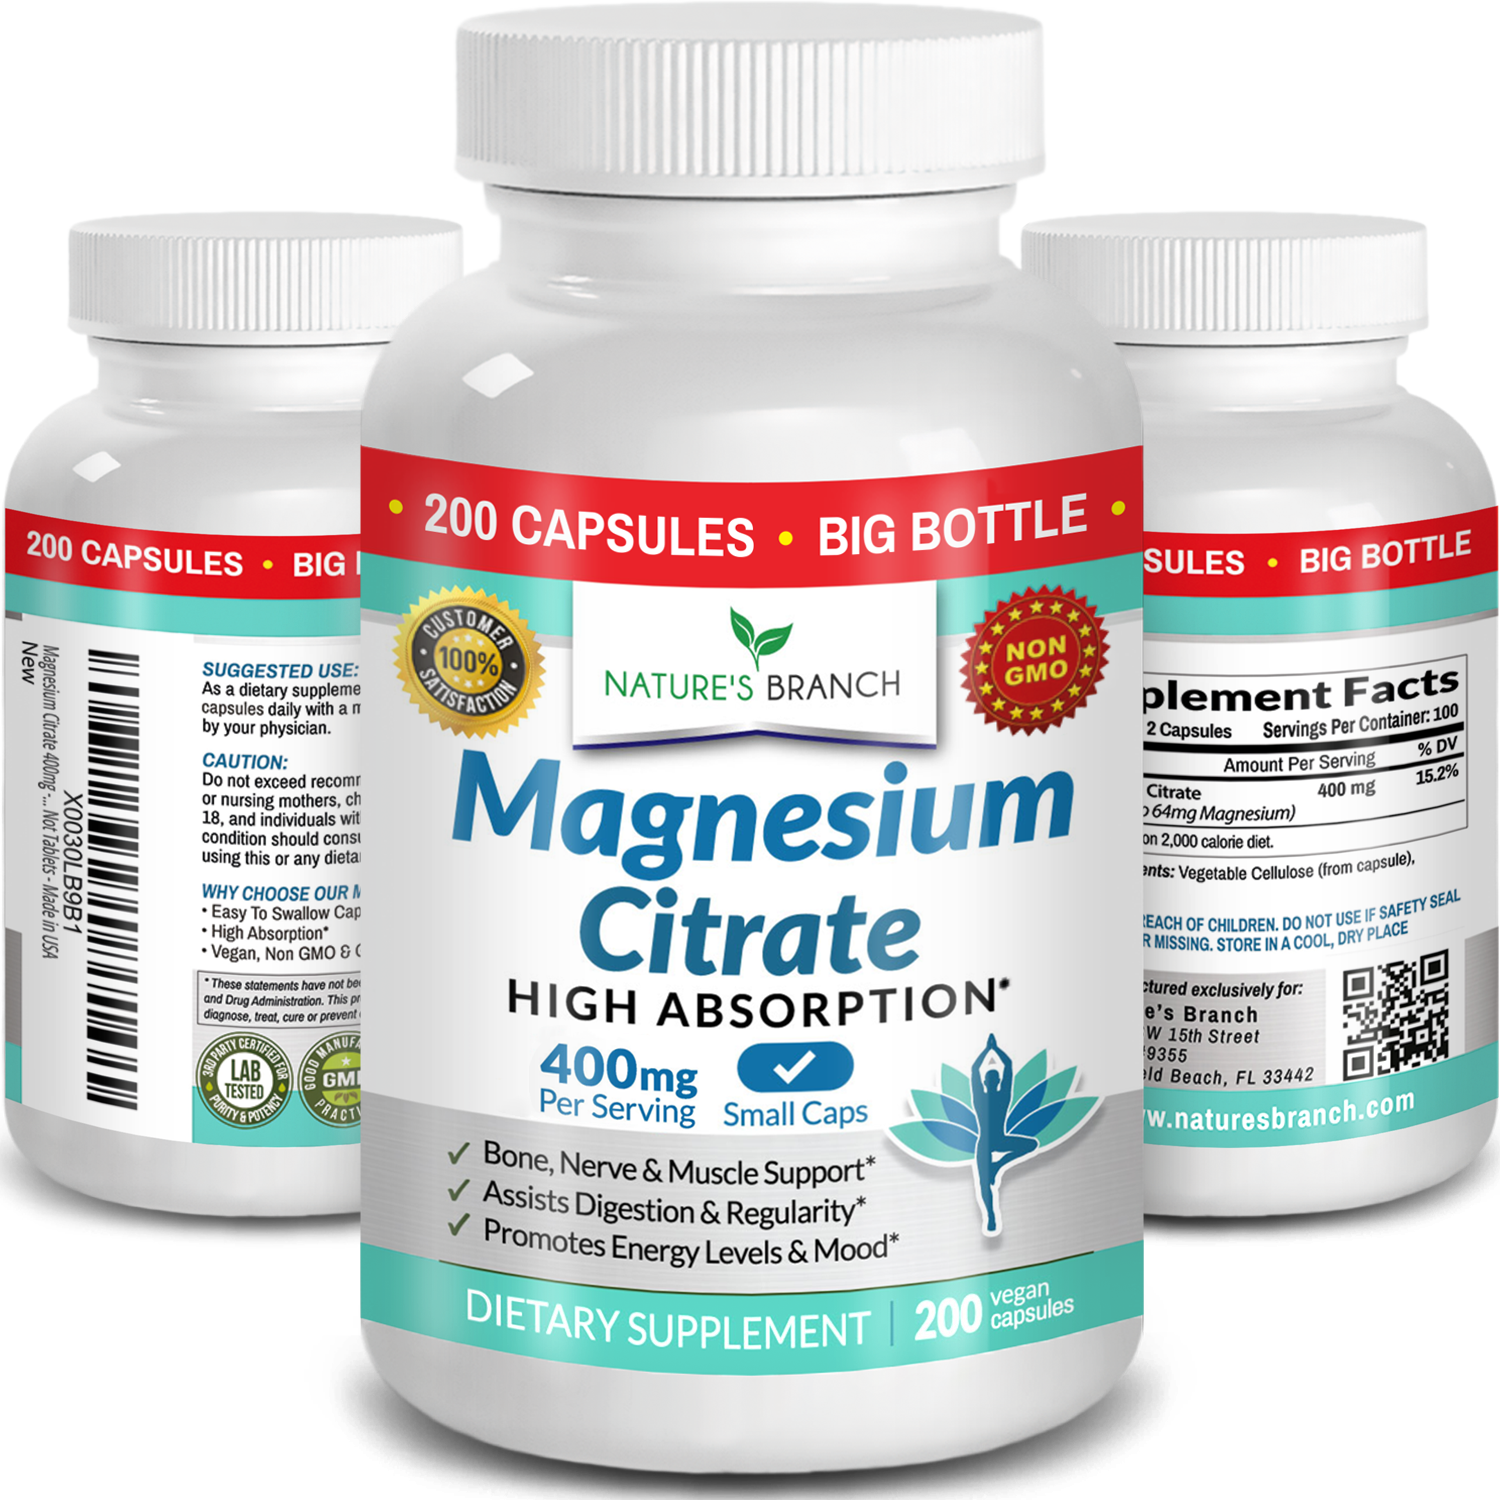 Nature's Branch Magnesium Citrate 400mg supplement bottles